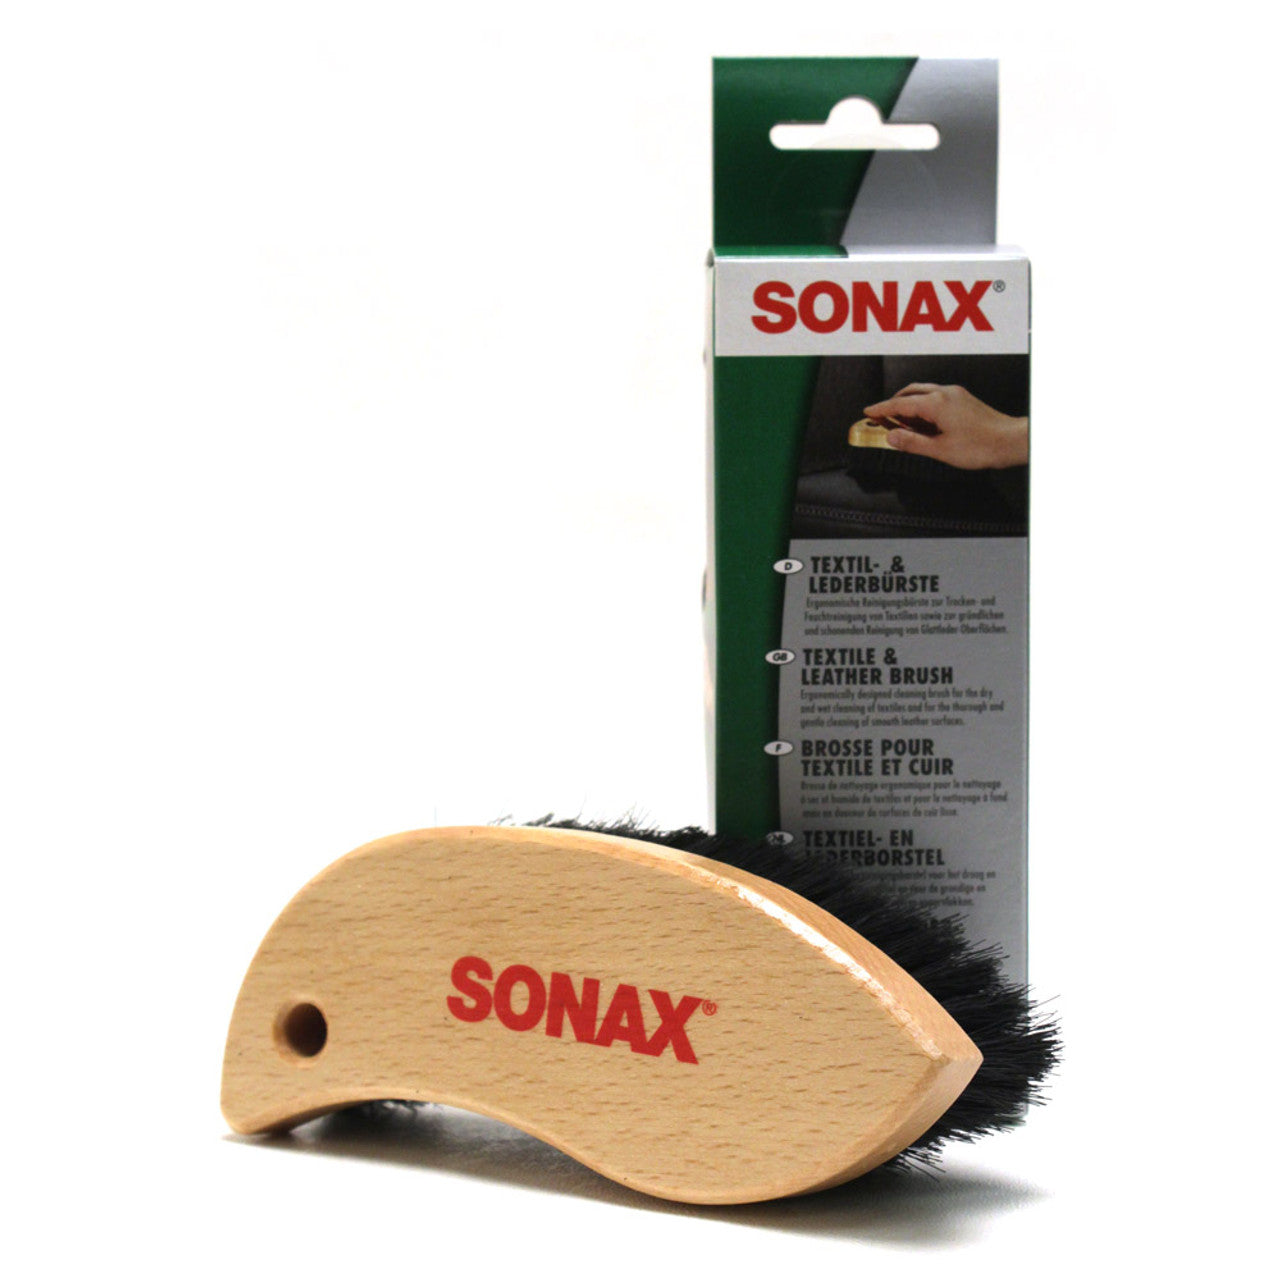 Sonax Textile & Leather Brush - Sierra Madre Collection